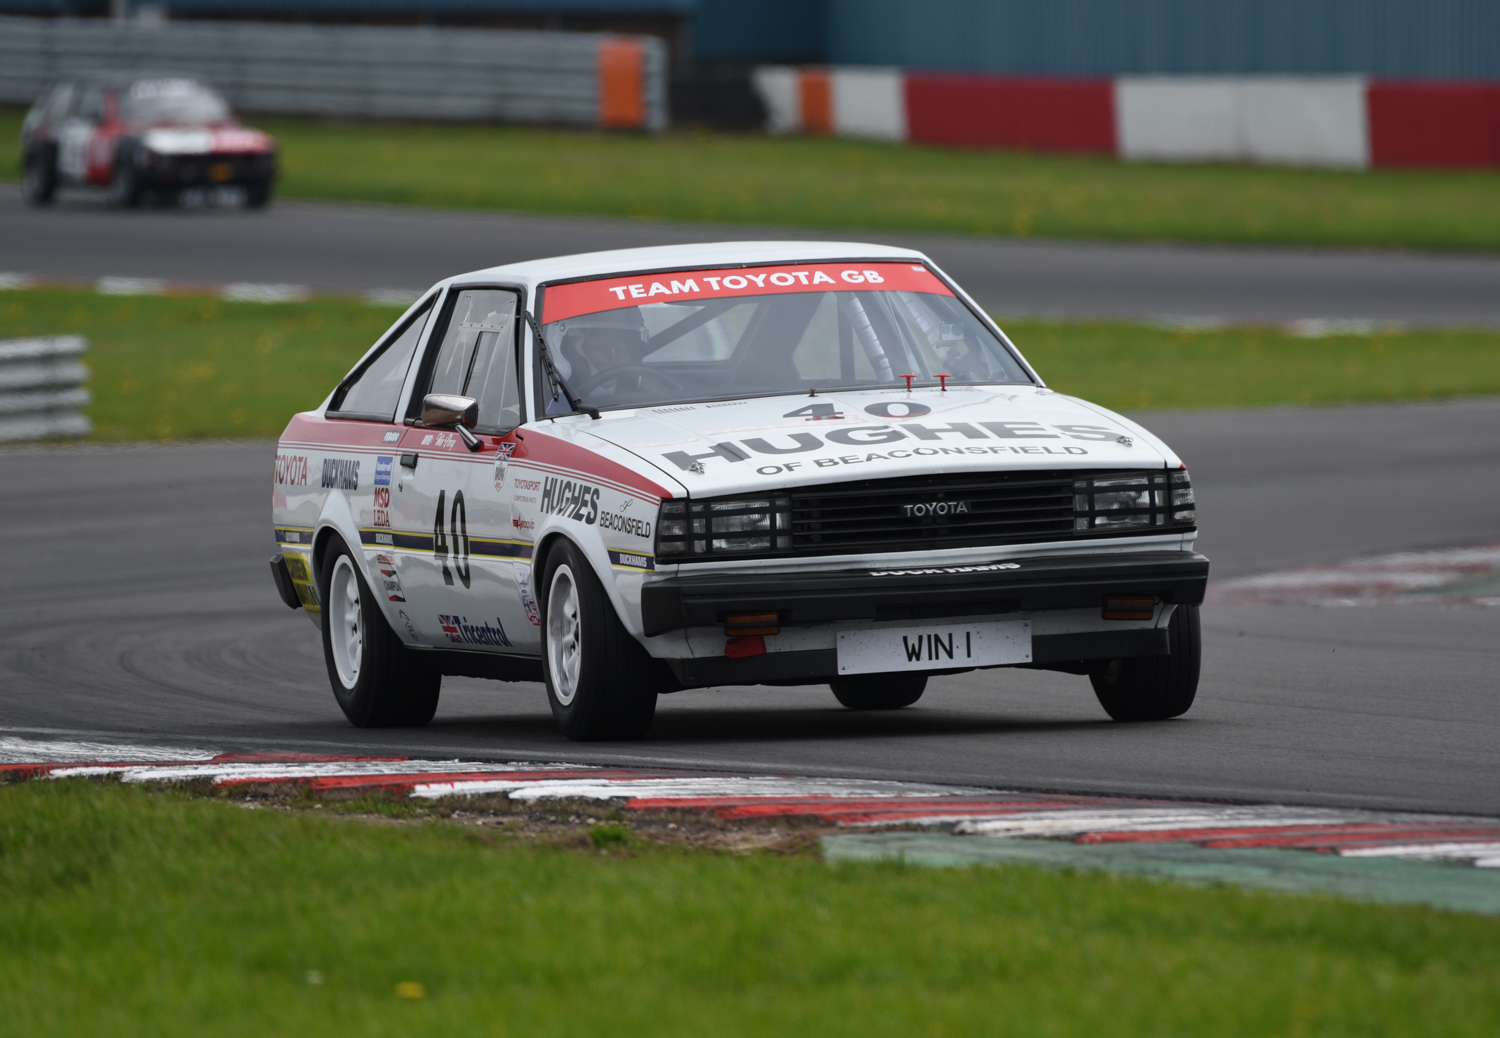 Toyota Corolla GT Peter Taylor